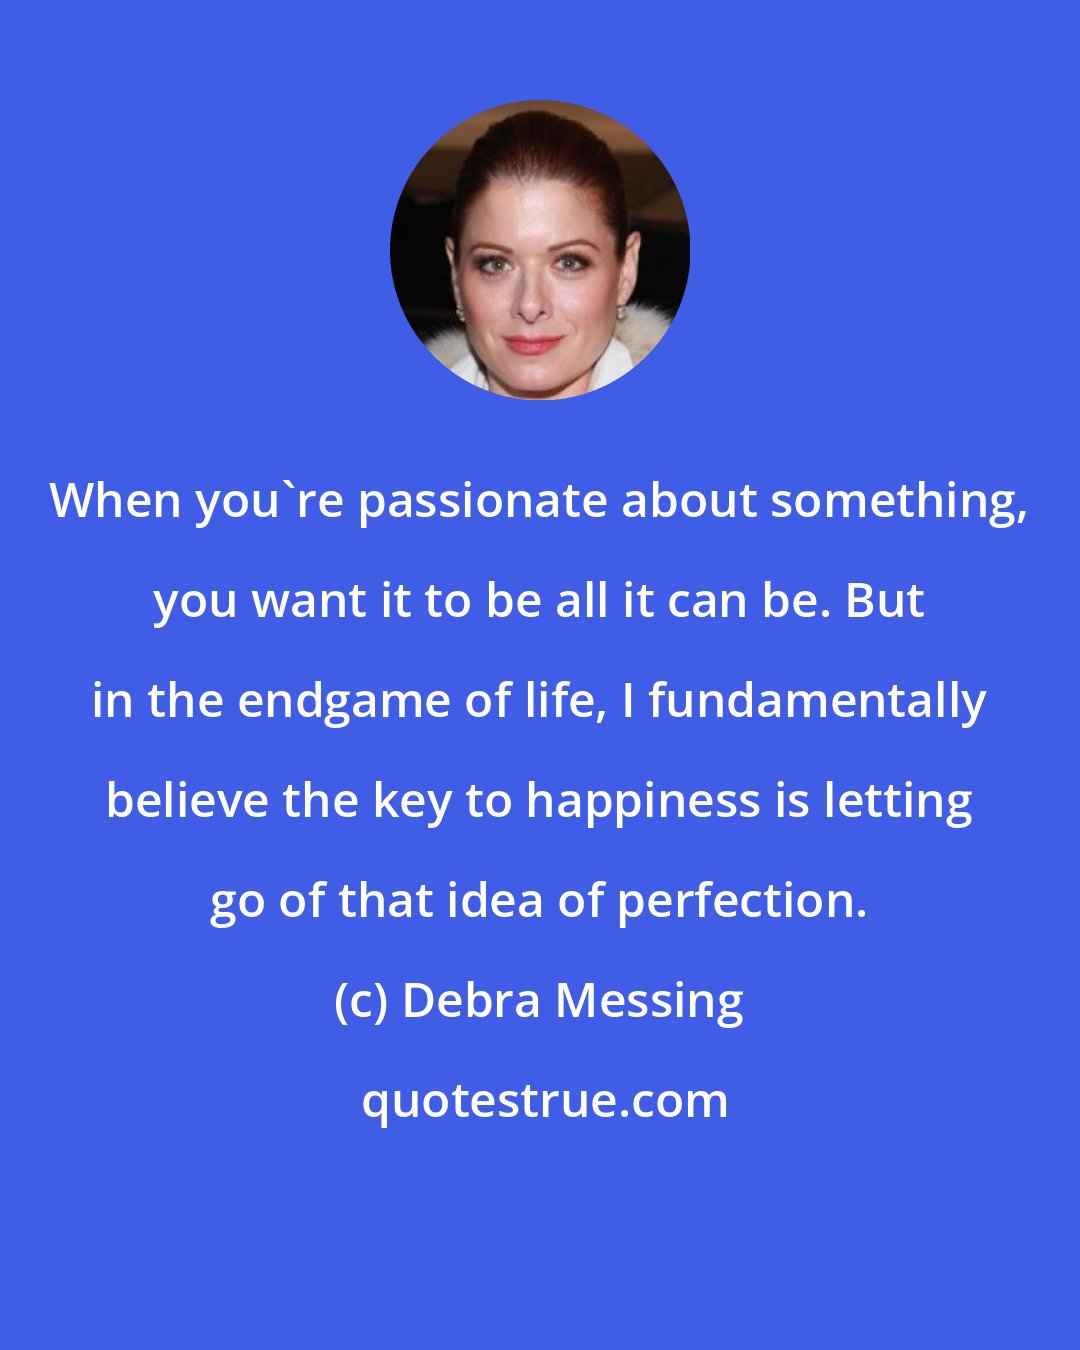 Debra Messing: When you're passionate about something, you want it to be all it can be. But in the endgame of life, I fundamentally believe the key to happiness is letting go of that idea of perfection.